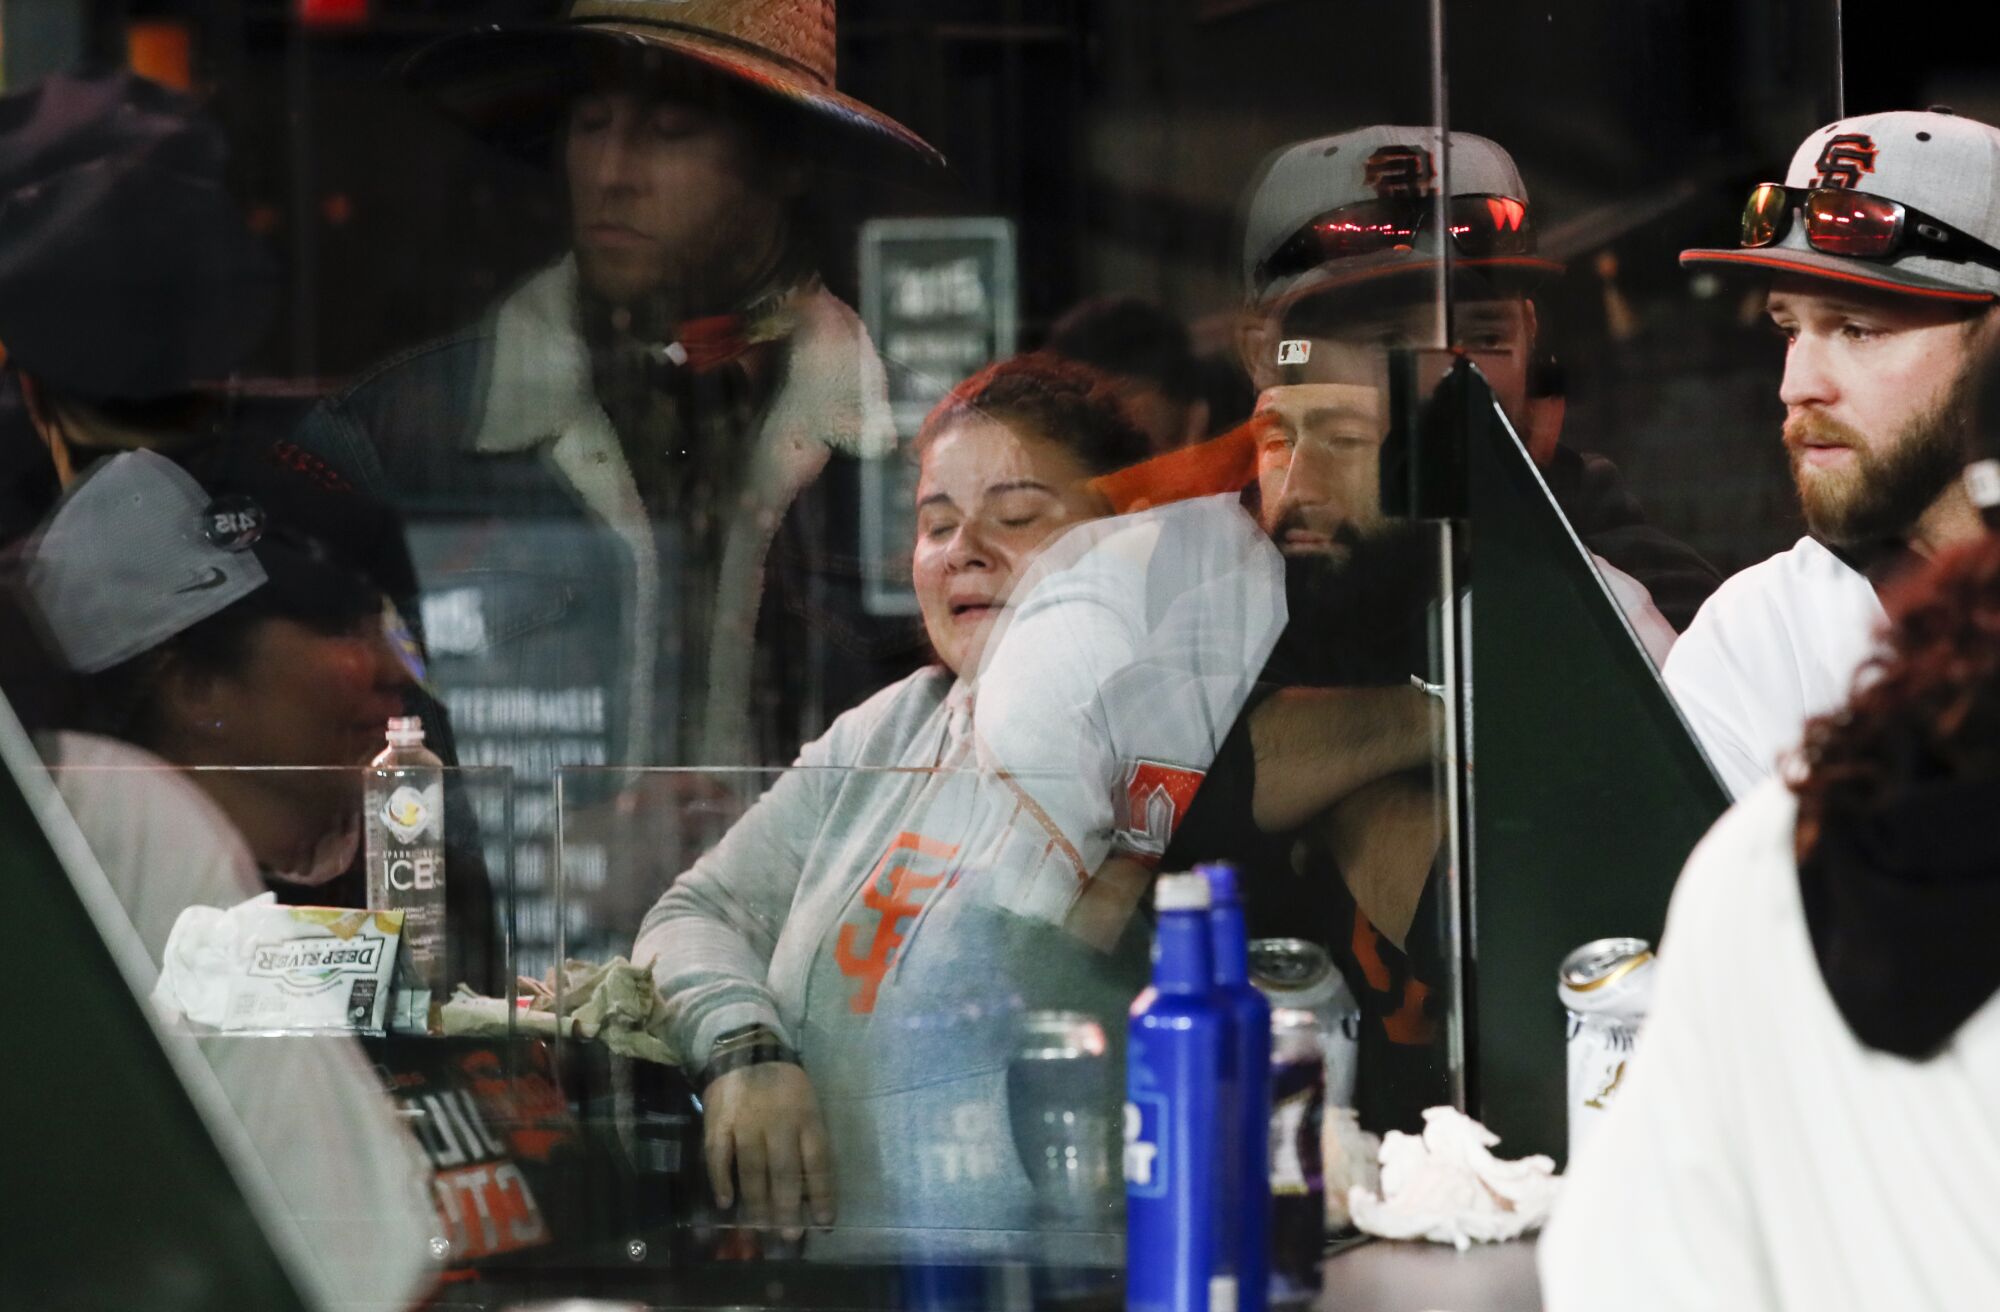 San Francisco Giants fans watch as the Los Angeles Dodgers celebrate after game five